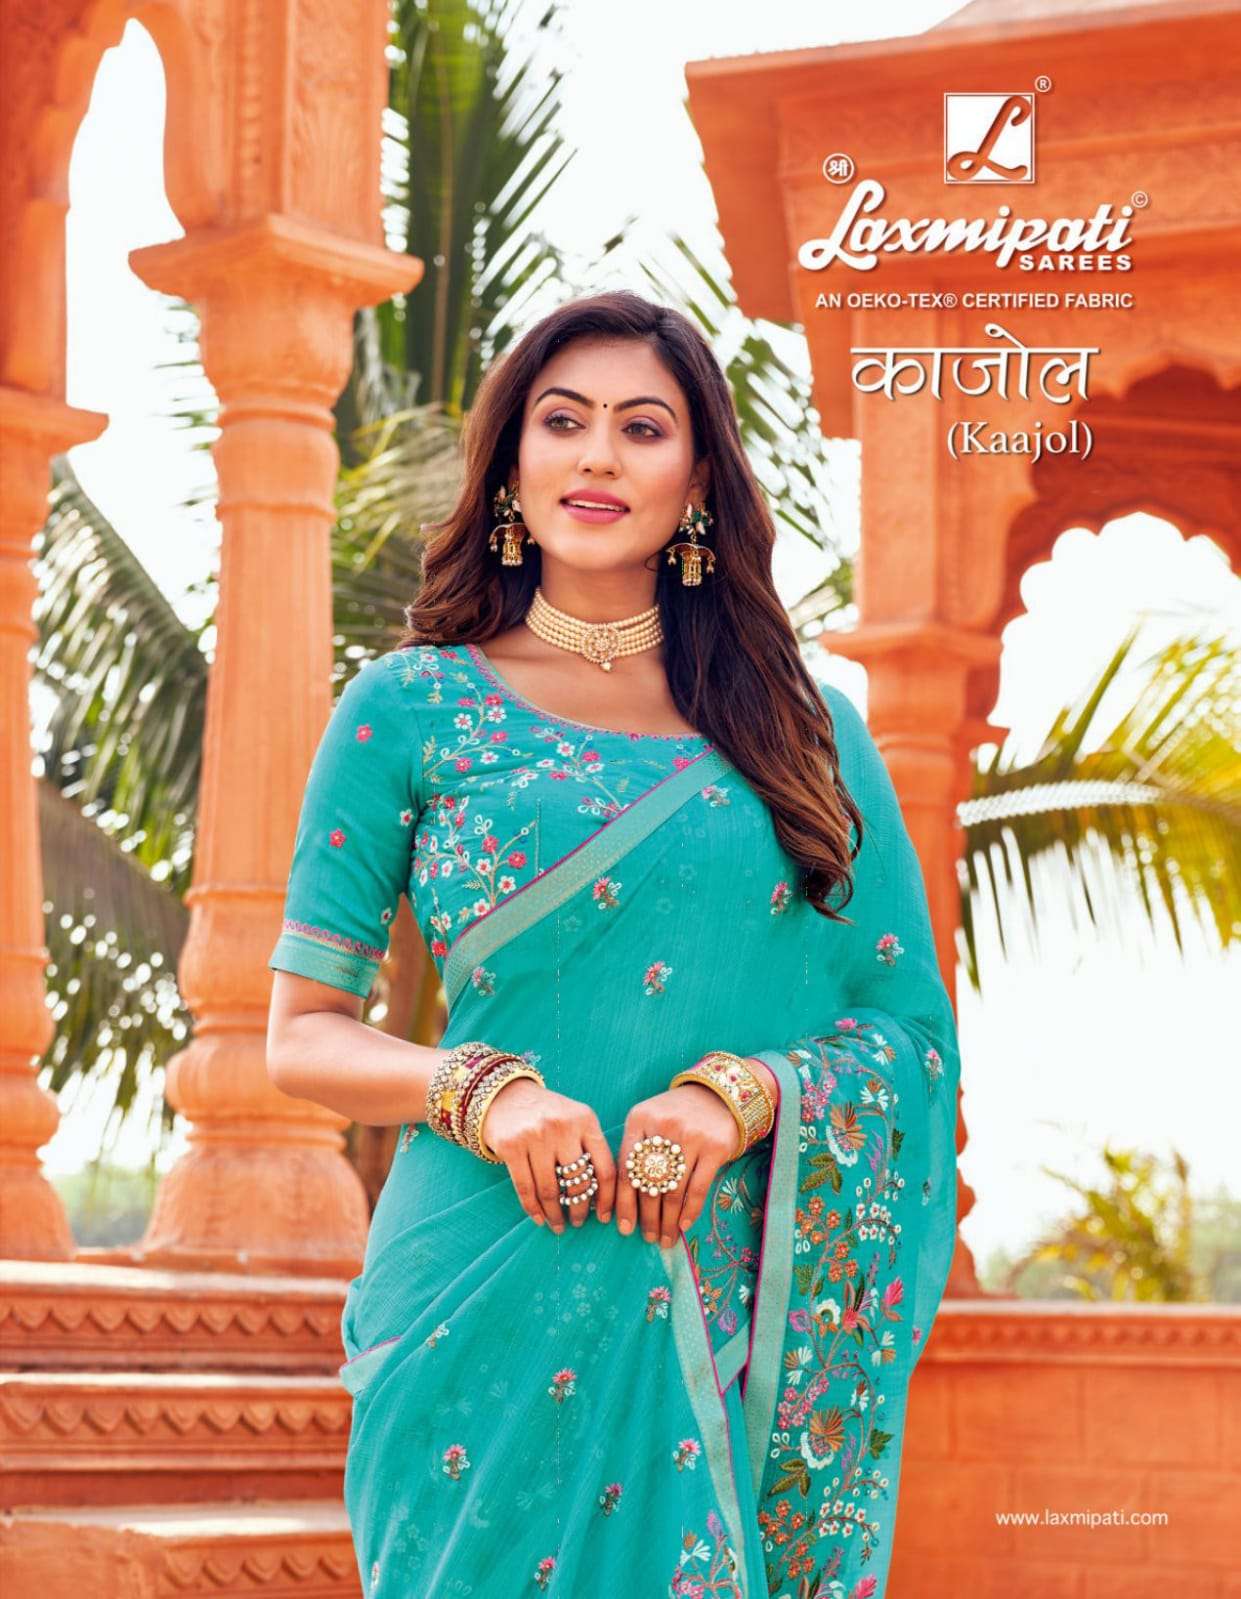 Laxmipati Kaajol Fancy Fabric With Designer EMbroidery work ...